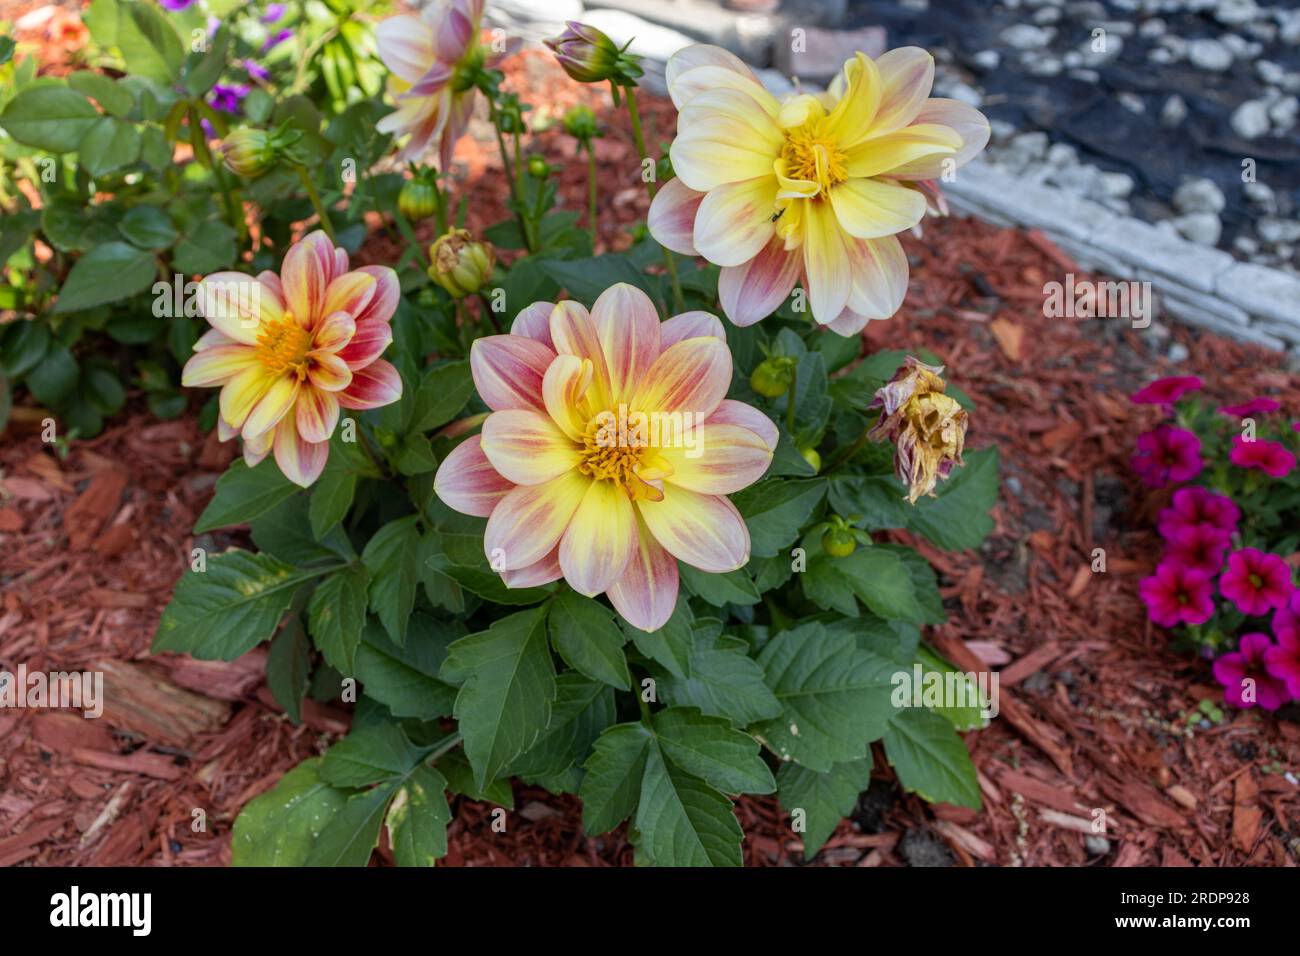 Garden bed of dahlias and other flowers with red mulch blurred background Stock Photo